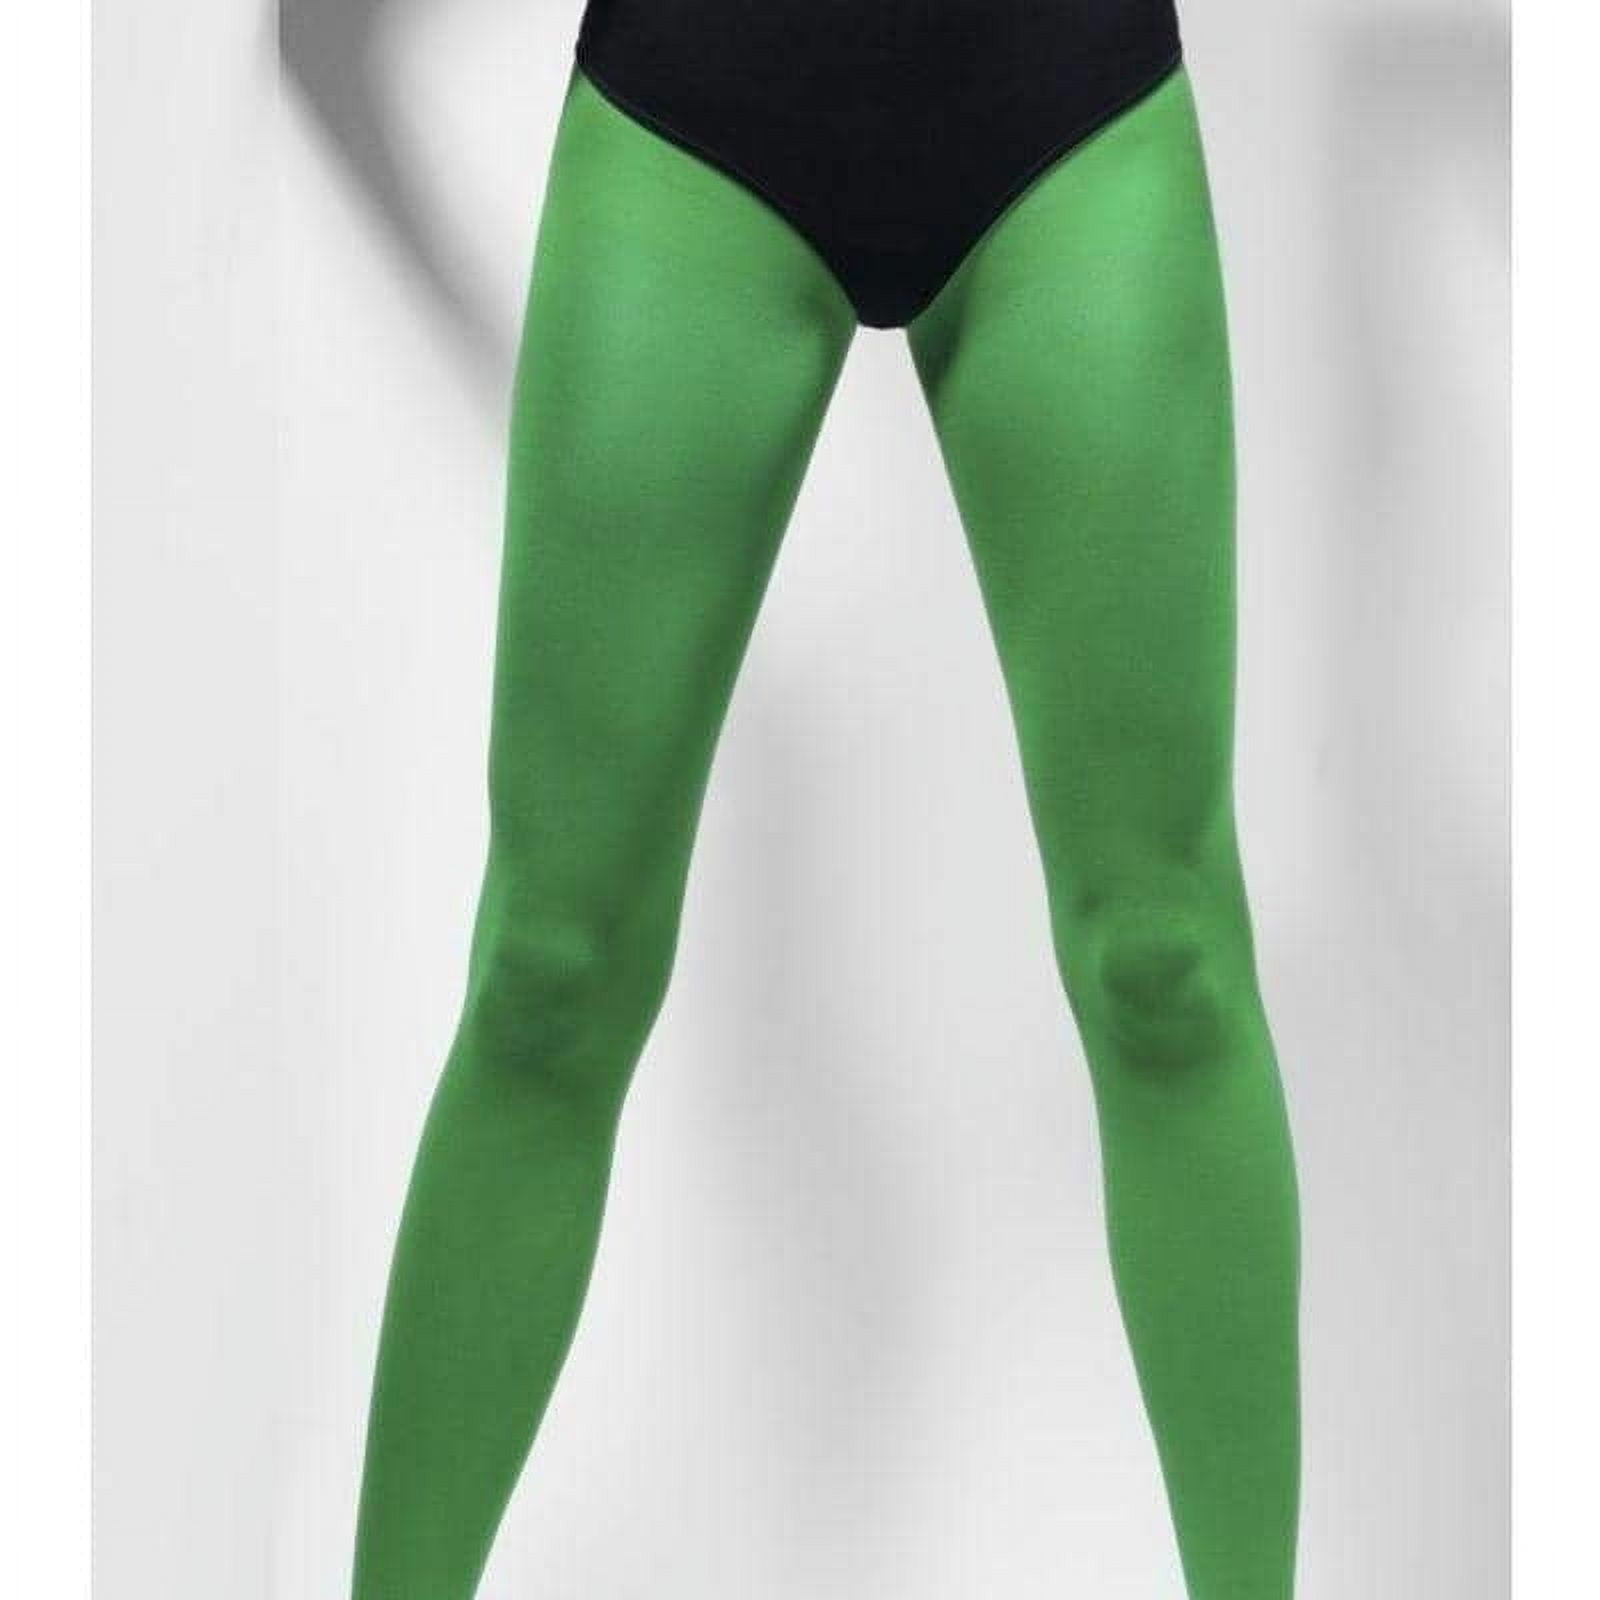 Women's Sexy Legs Green Pantyhose Opaque Tights Costume Accessory